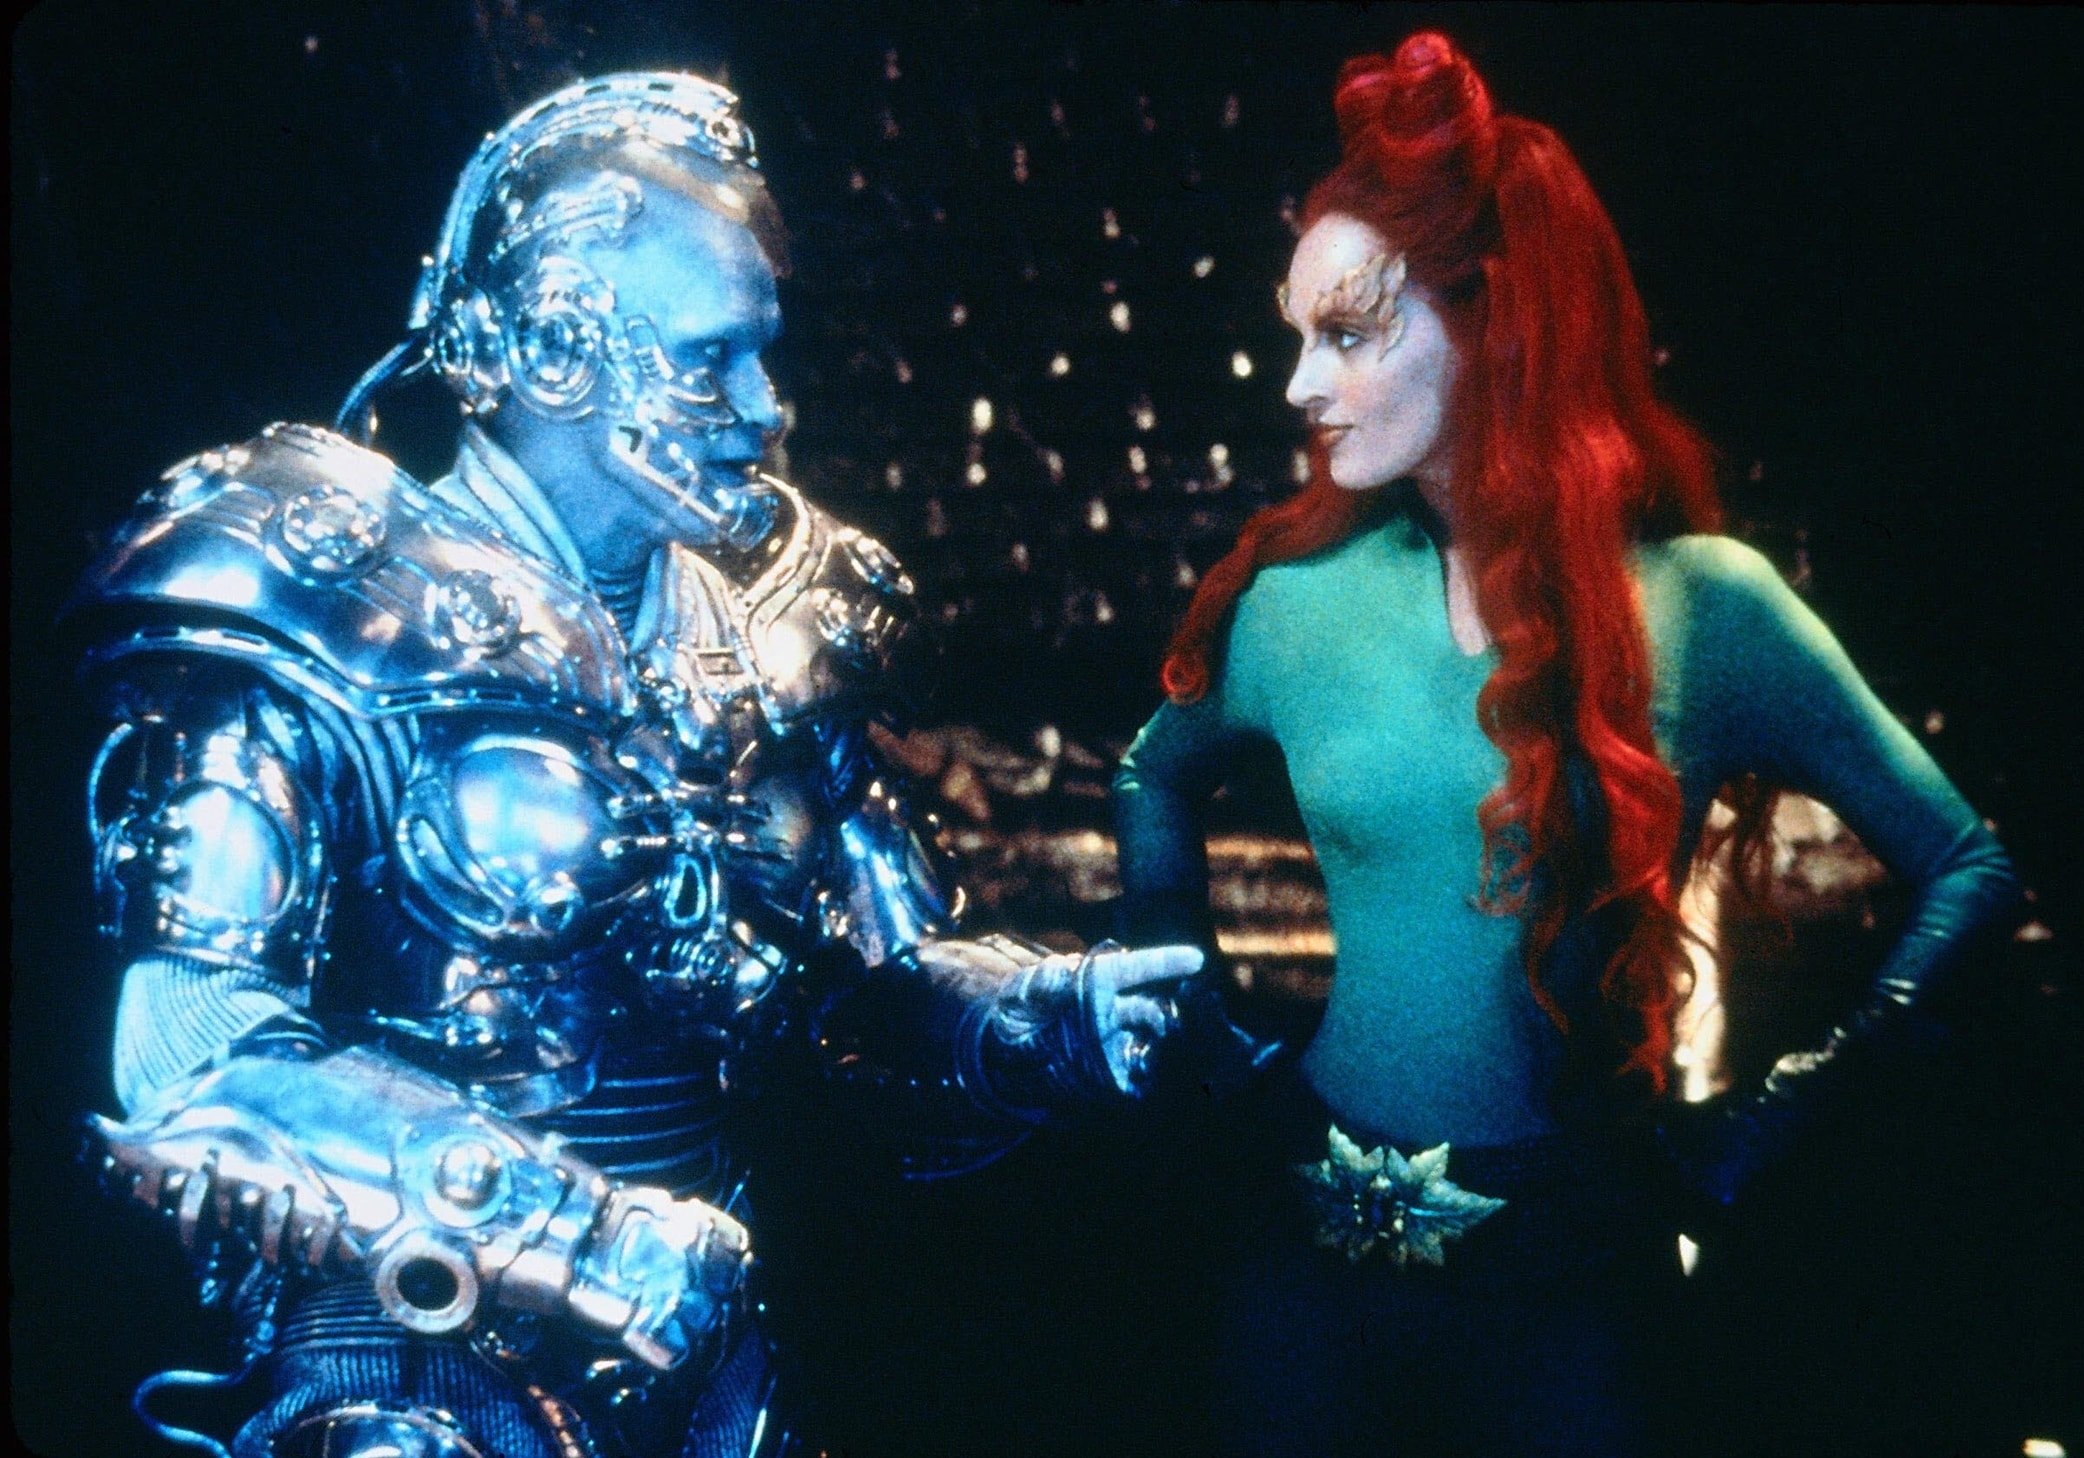 Many film critics consider Batman & Robin to be one of the worst movies of all time